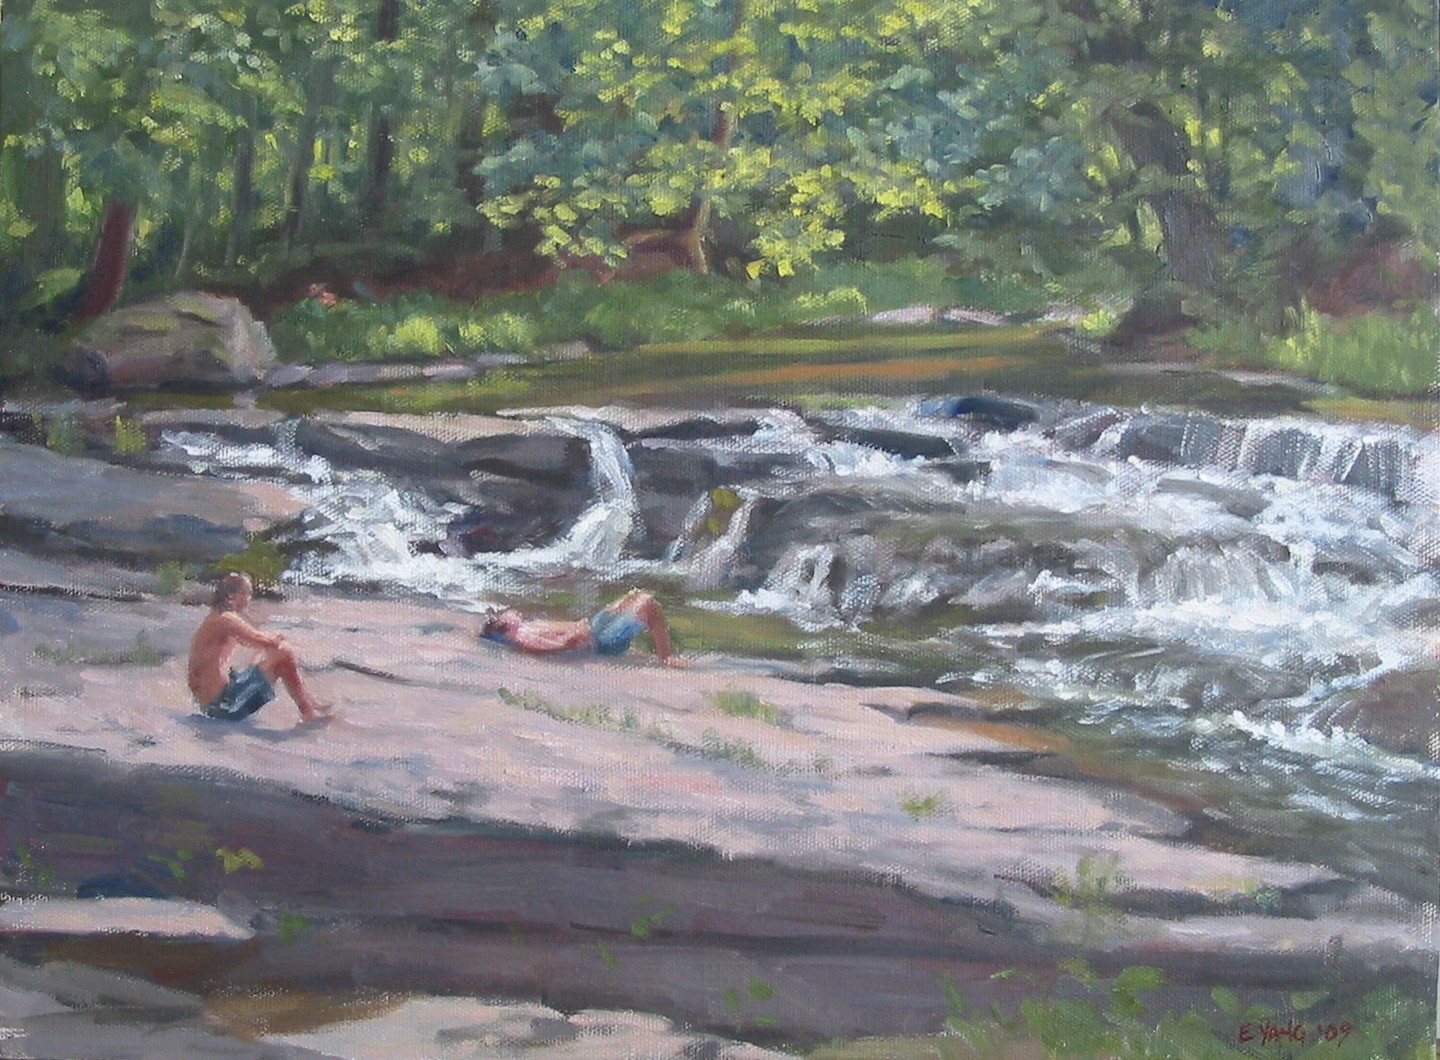 Drying Off By Waterfalls, oil on canvas, 12 x 16 inches